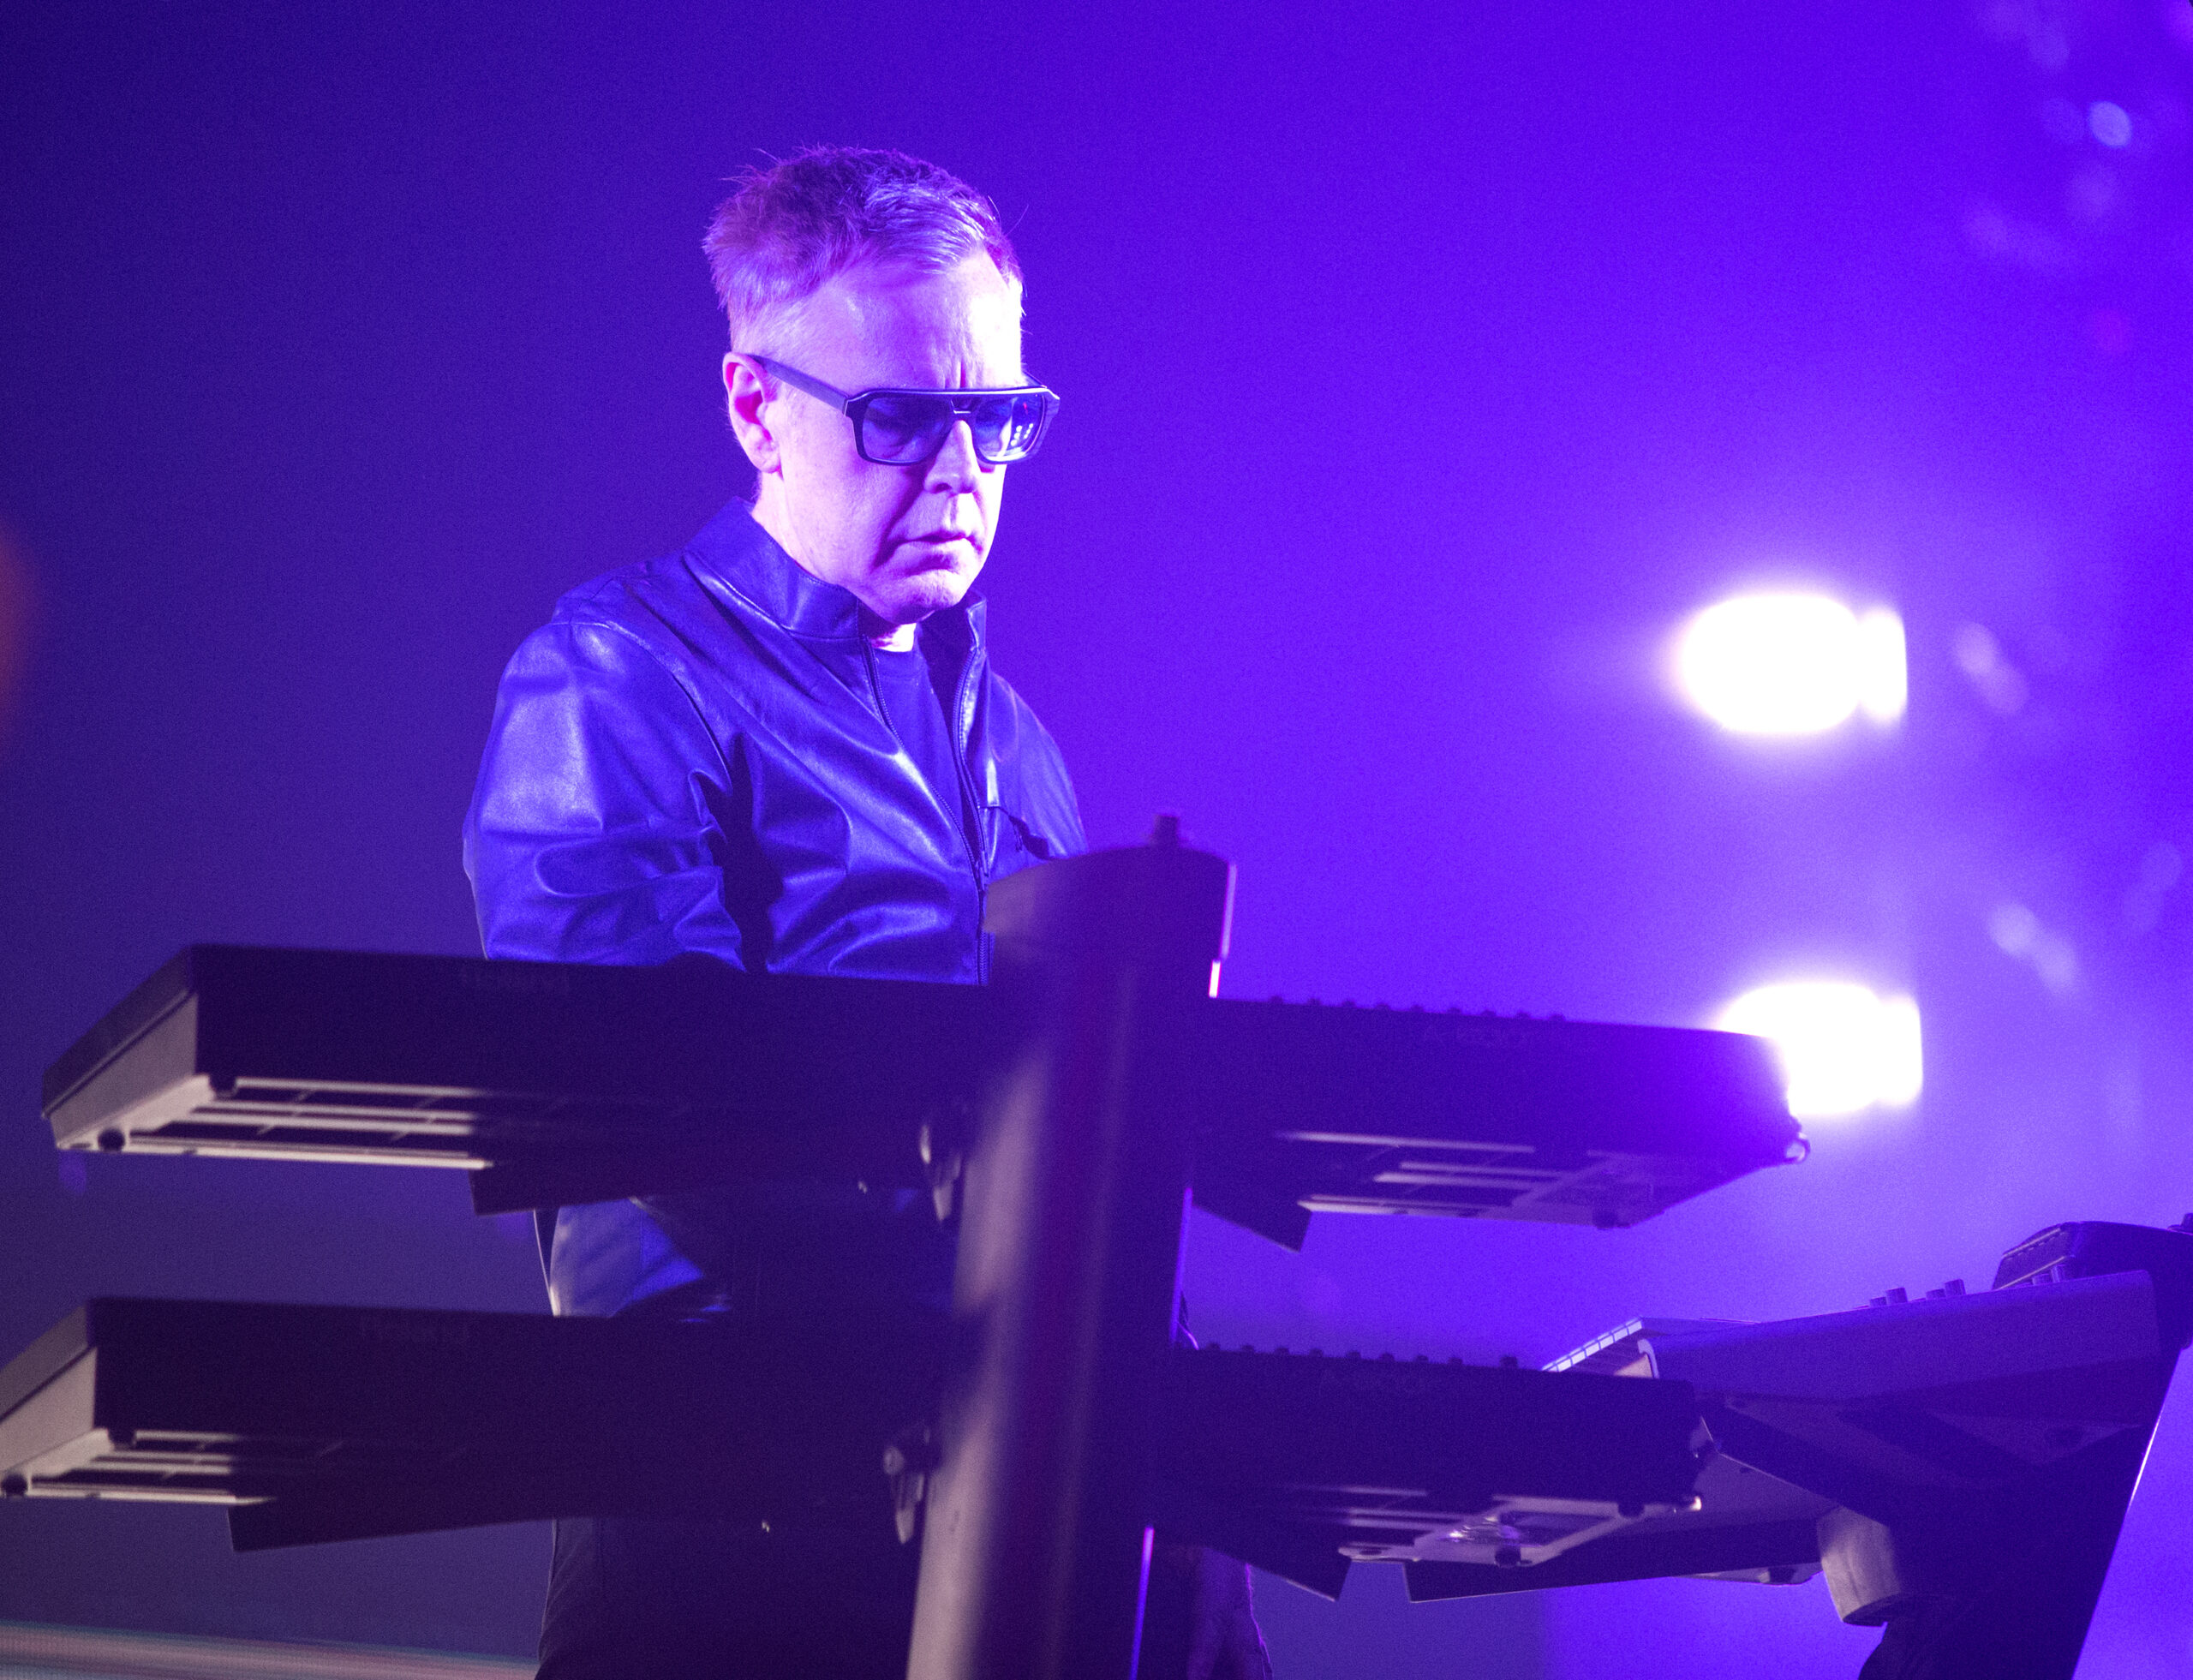 FILE - Andy Fletcher of the band Depeche Mode performs in concert during their "Global Spirit Tour" at the Capital One Arena, Sept. 7, 2017, in Washington, D.C. Fletcher, keyboardist for British synth pop giants Depeche Mode for more than 40 years has died at age 60. Depeche Mode announced the death of founding member Fletcher on its official social media pages. A person close to the band said Fletcher died Thursday, May 26, 2022, from natural causes at his home in the U.K. The person spoke on condition of anonymity because they were not authorized to speak publicly. (Photo by Owen Sweeney/Invision/AP, File)